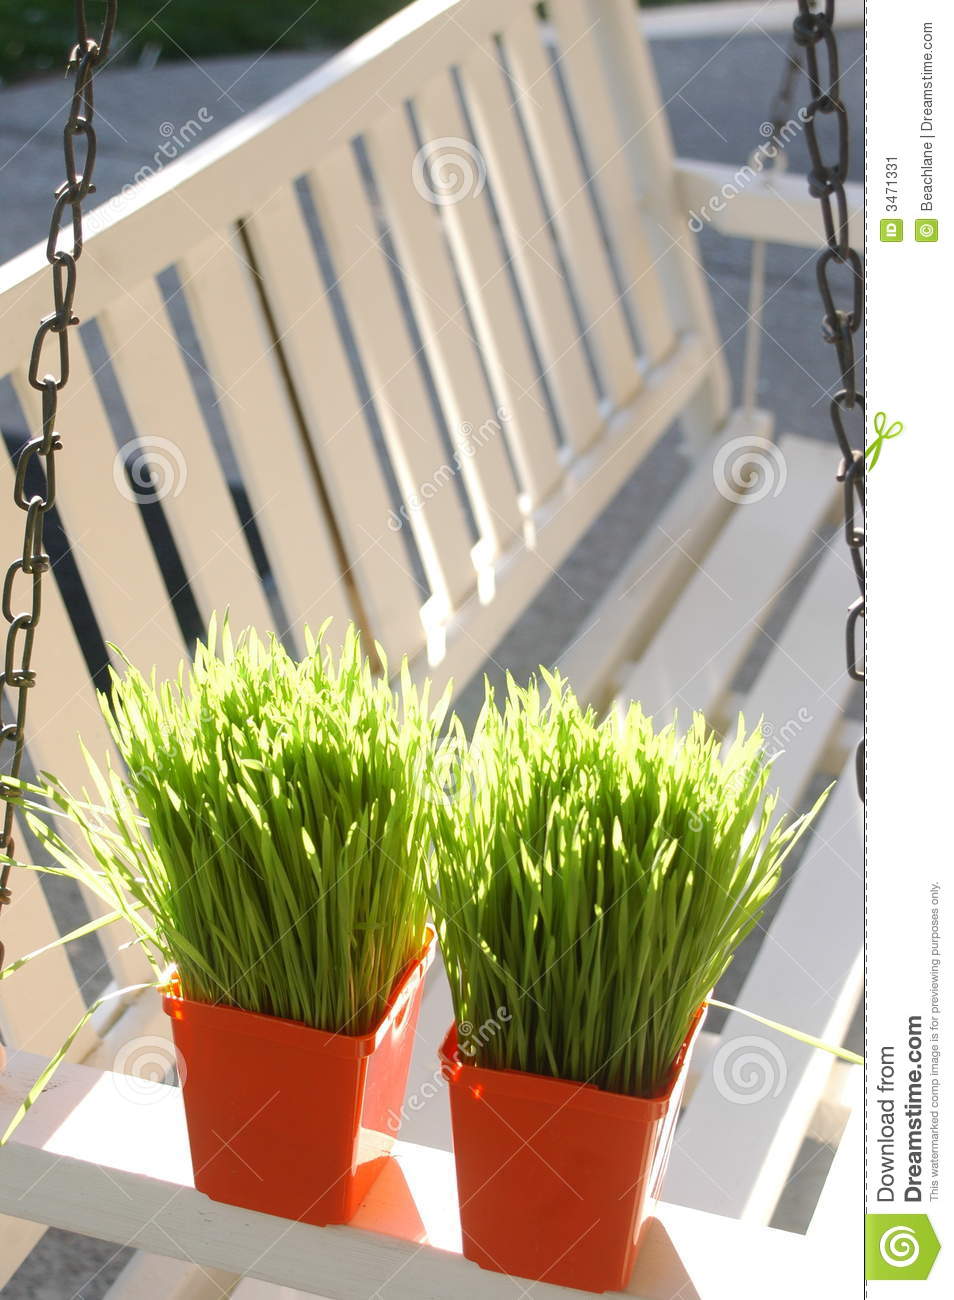 White Porch Swing With Grass Stock Image   Image  3471331